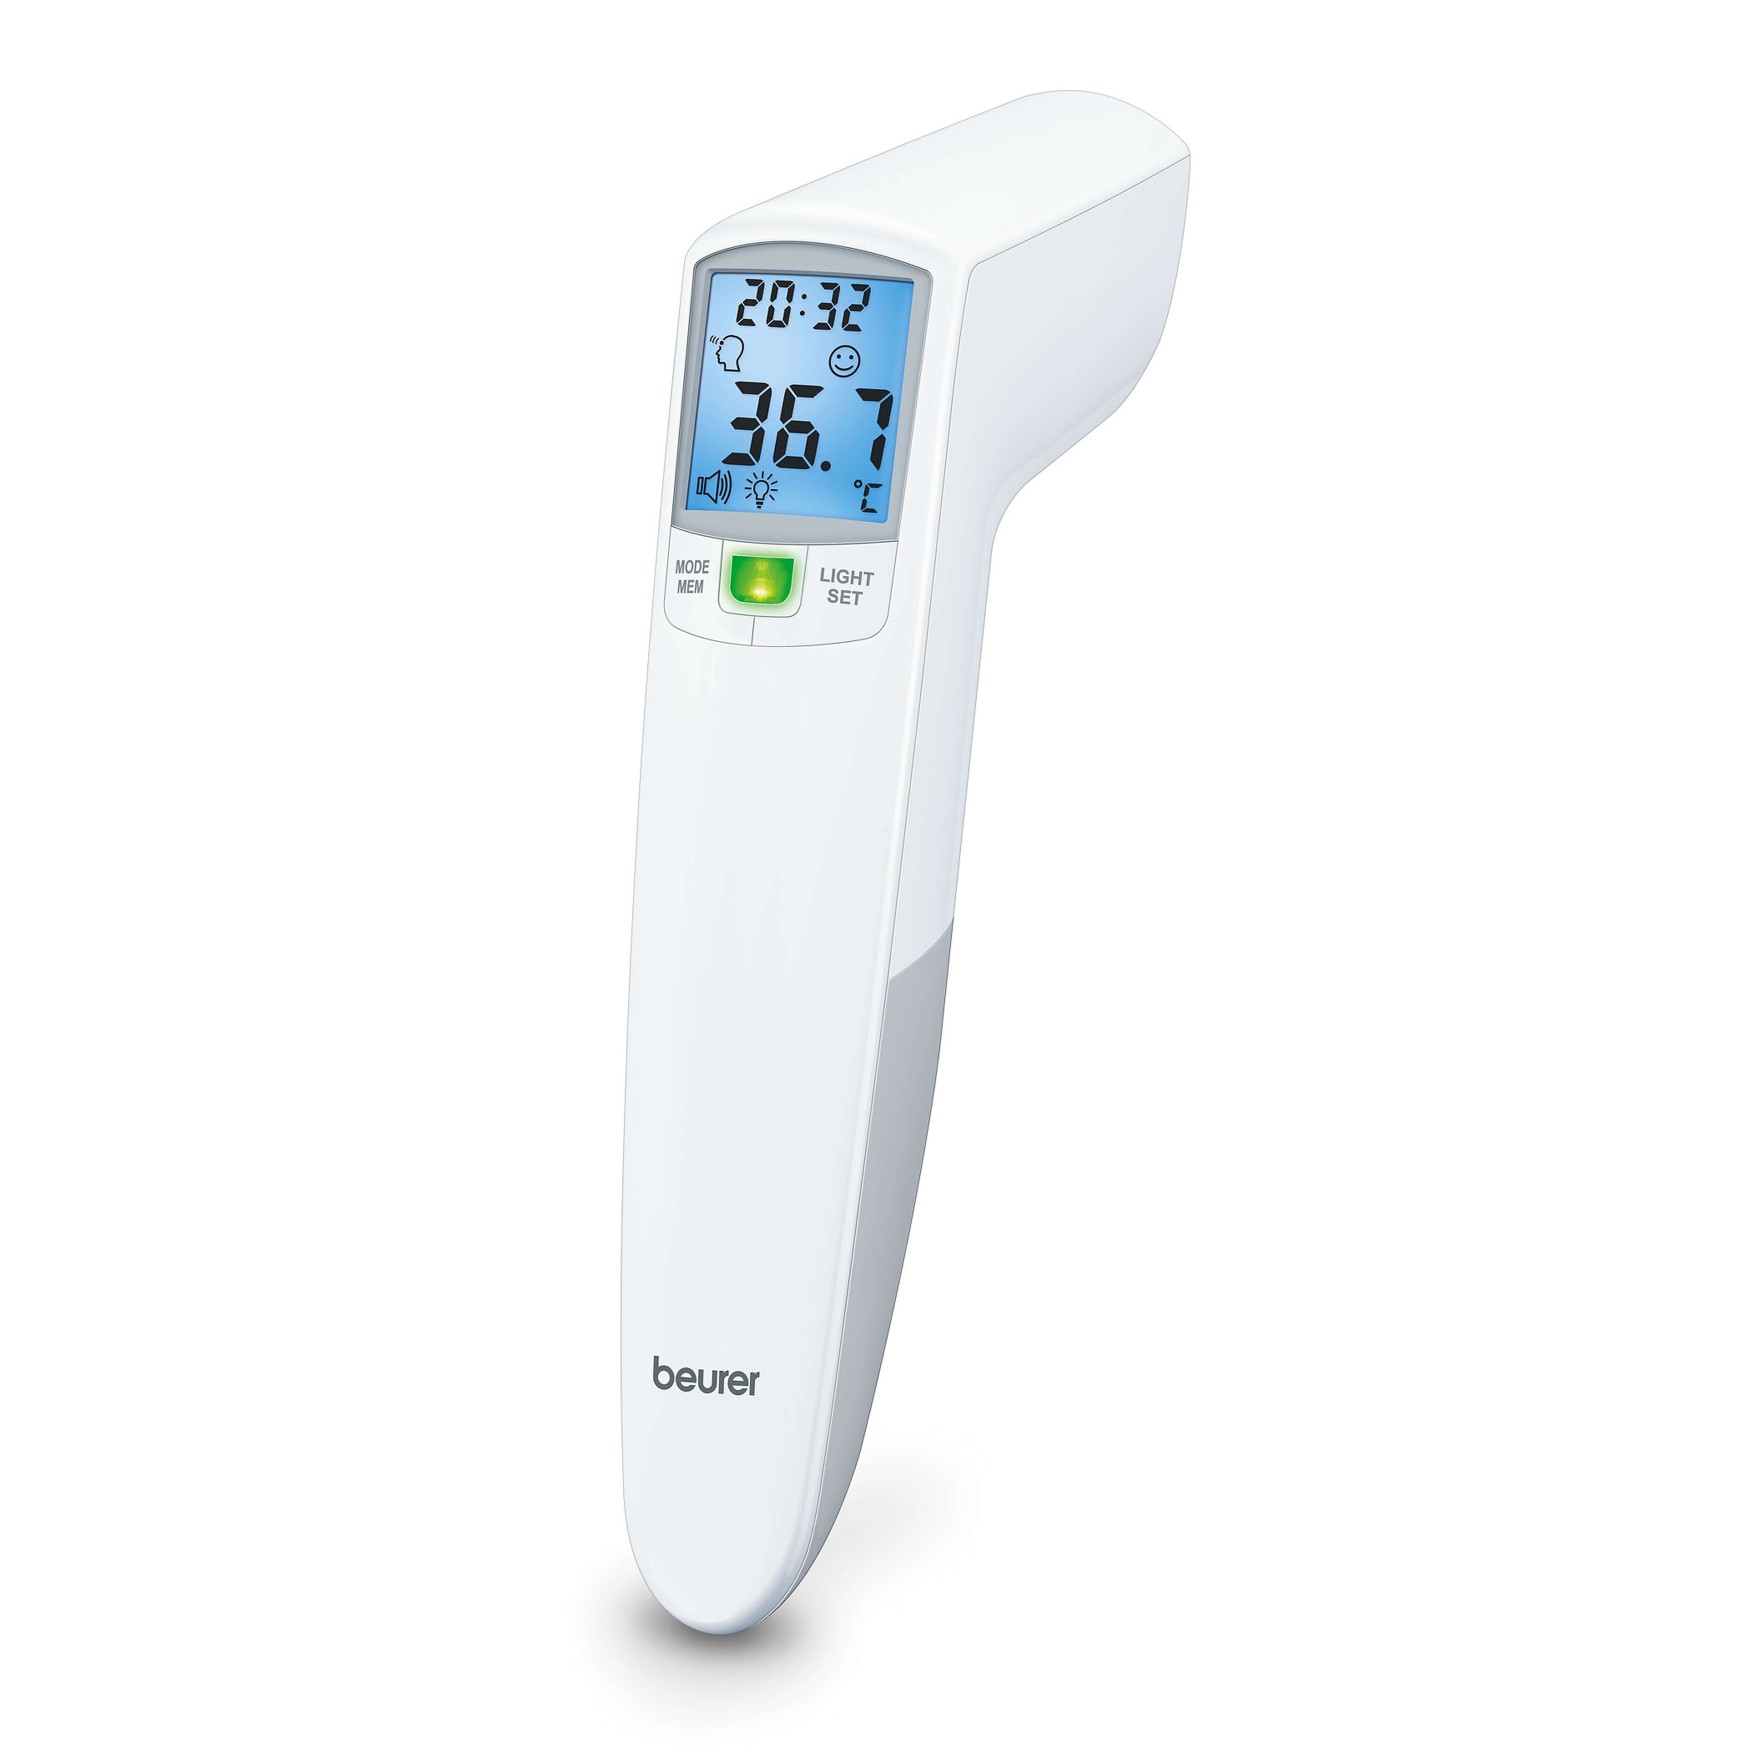 https://www.twins.co.uk/user/products/large/beurer-ft100-non-contact-infared-thermometer-3.jpg